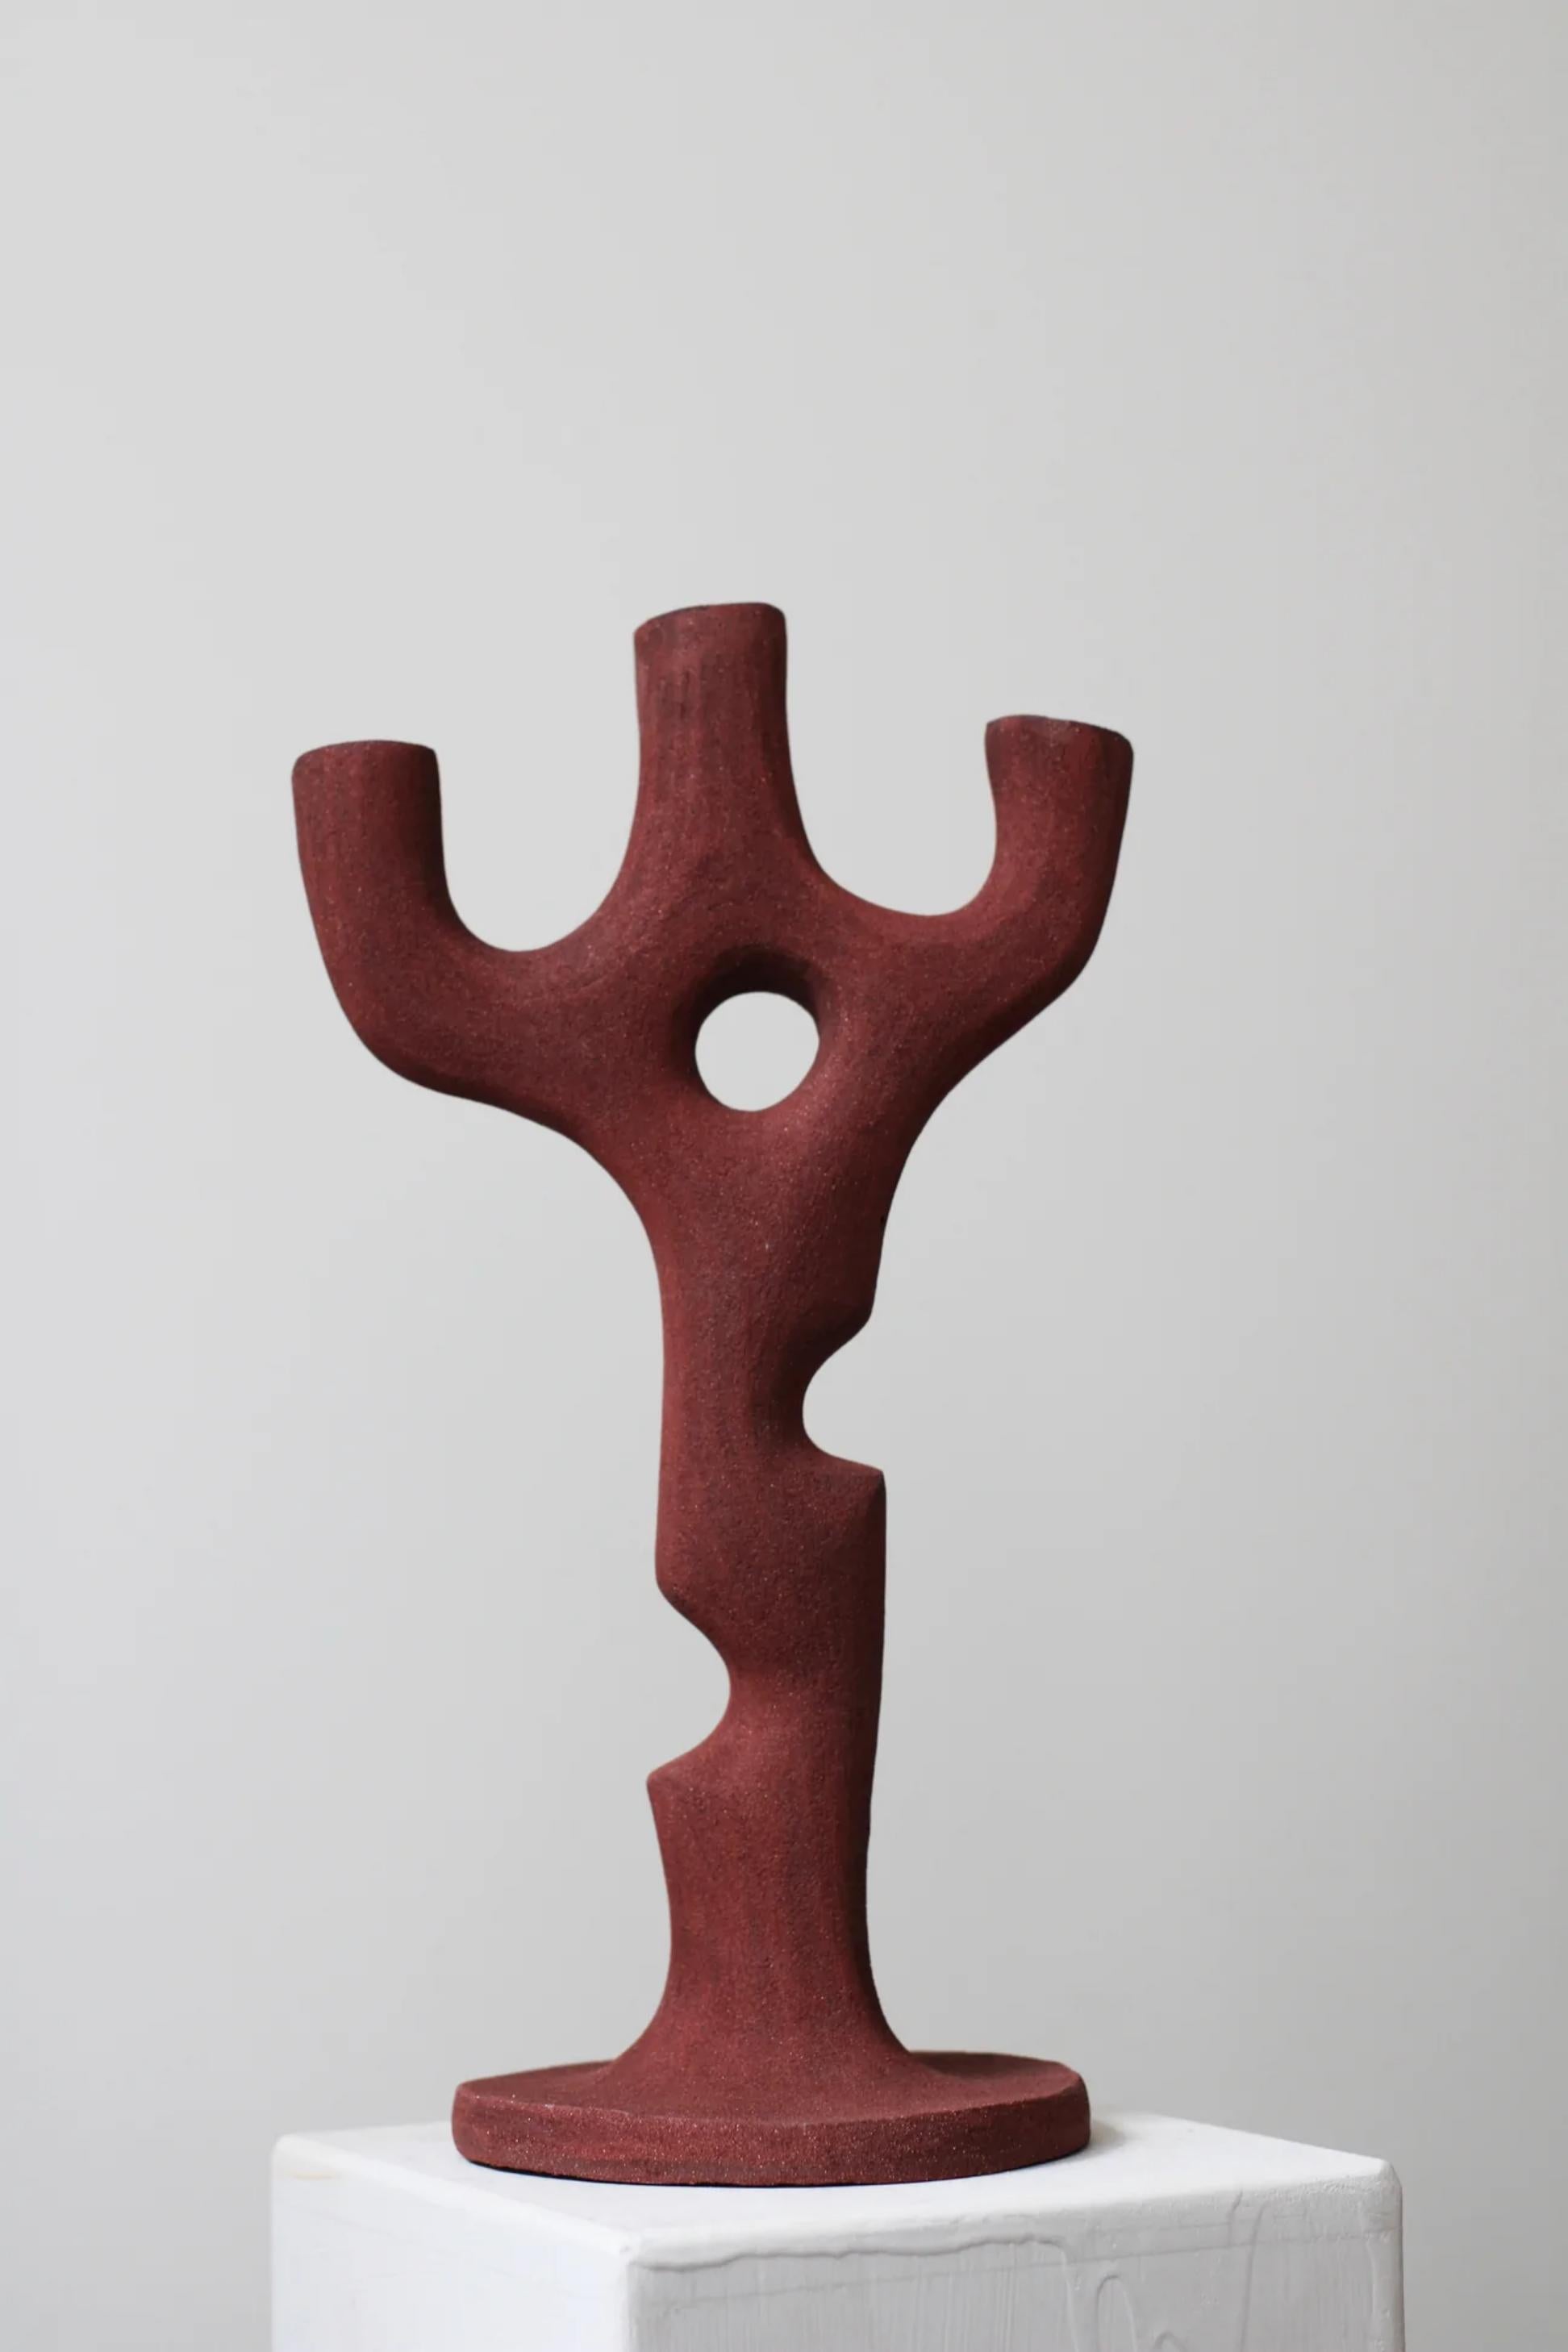 Augmin Candelabra by Abid Javed
Dimensions: W 20 x D 10 x 30 cm (Dimensions are variable)
Materials: Stoneware ceramic
Multiple clay colors and size options.

Three-armed Candelabra - adopted from a branching molecular complex,